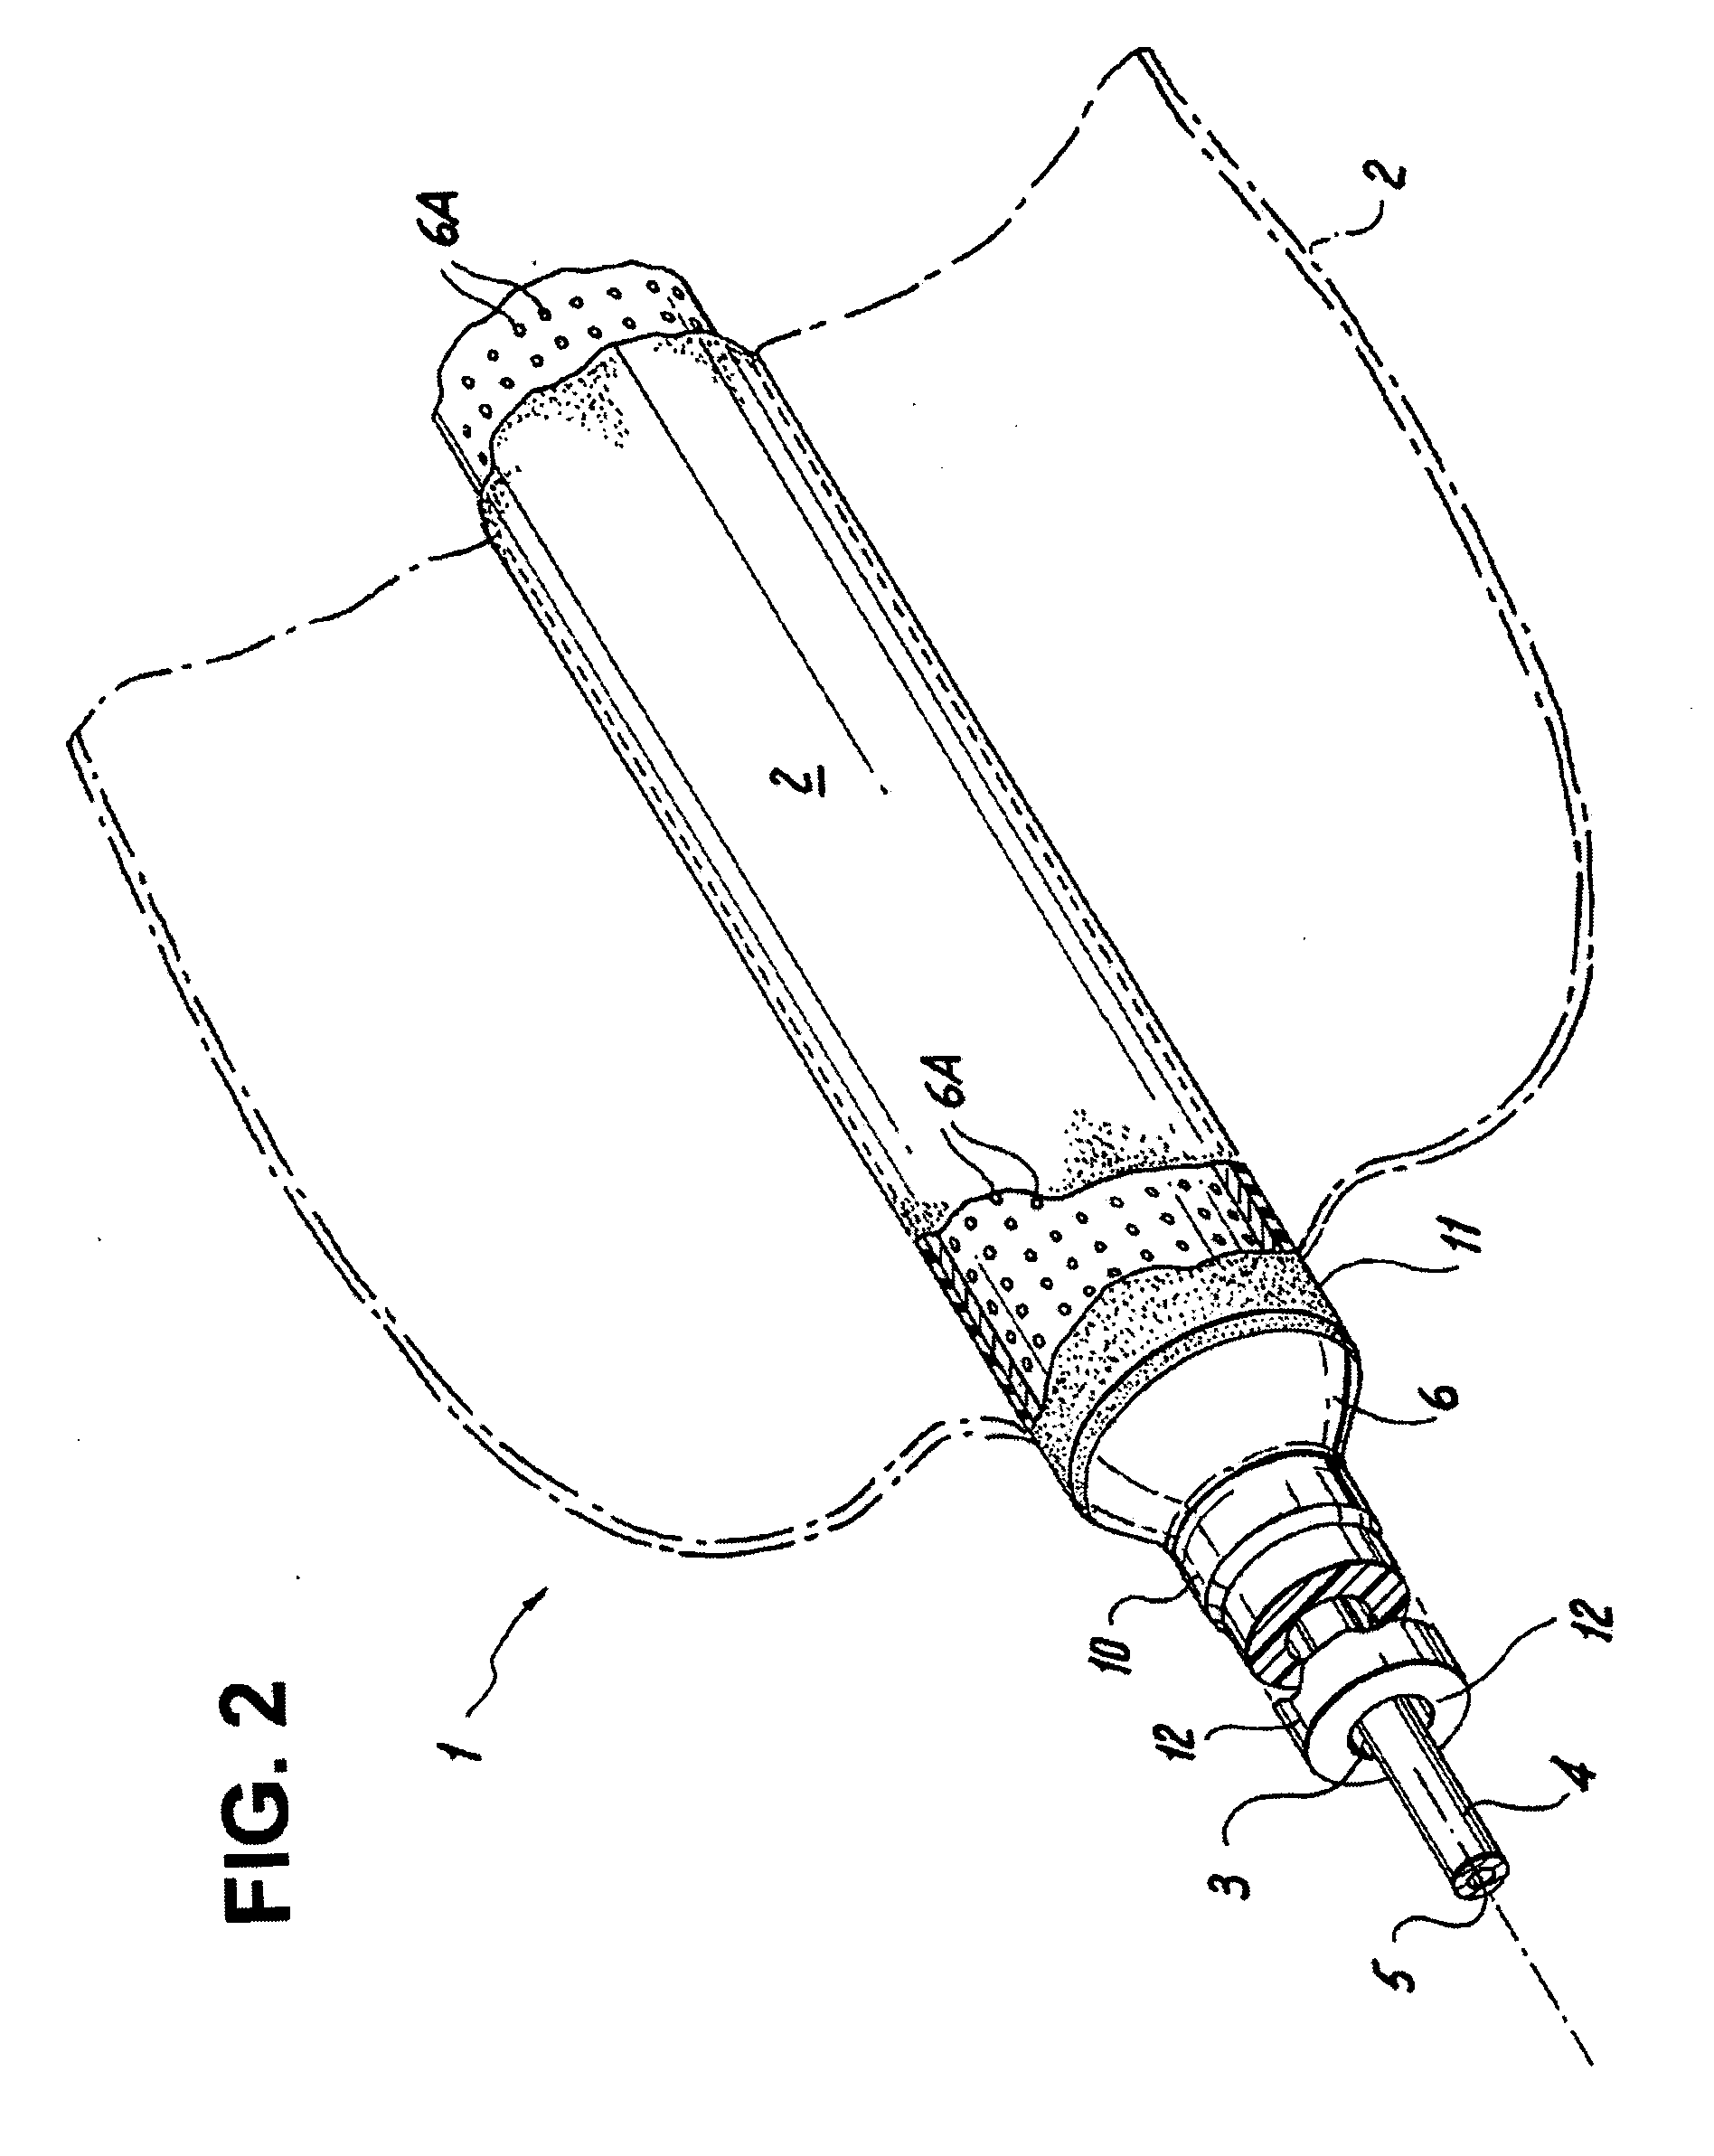 Endoscopically placed gastric balloon (EPGB) device and method for treating obesity involving the same